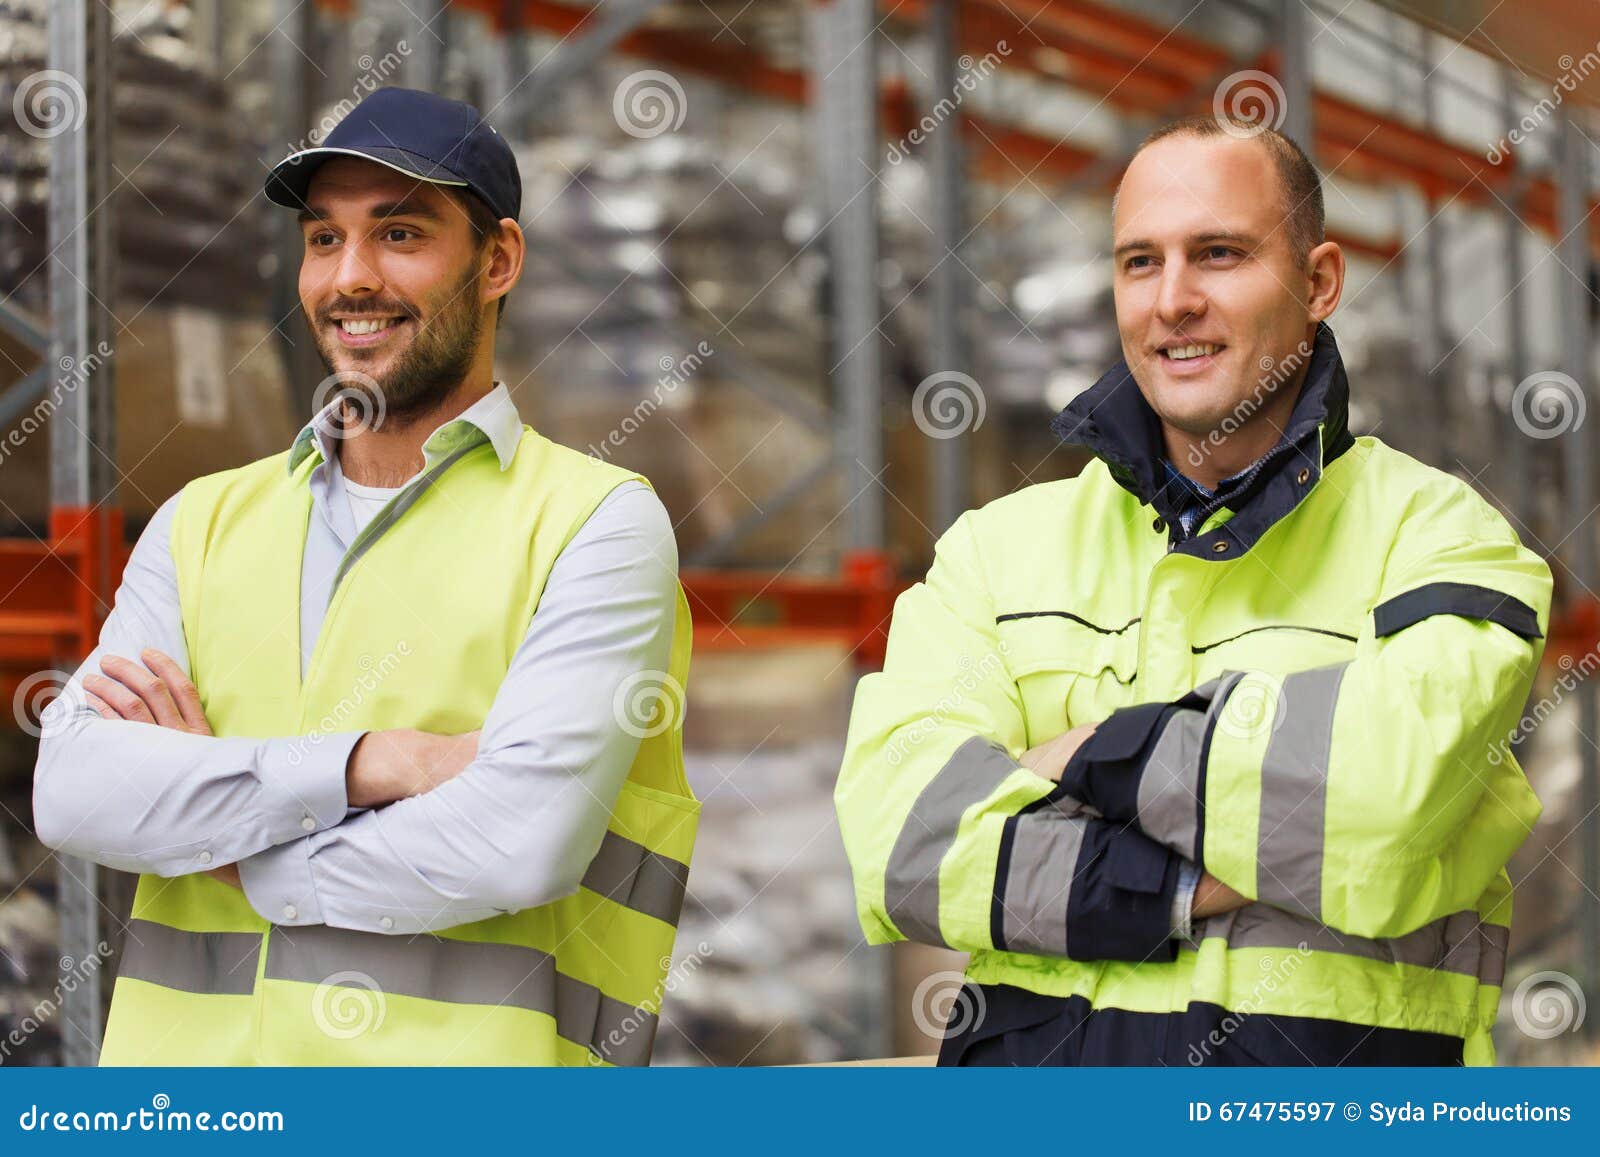 Smiling Men in Reflective Uniform at Warehouse Stock Image - Image of